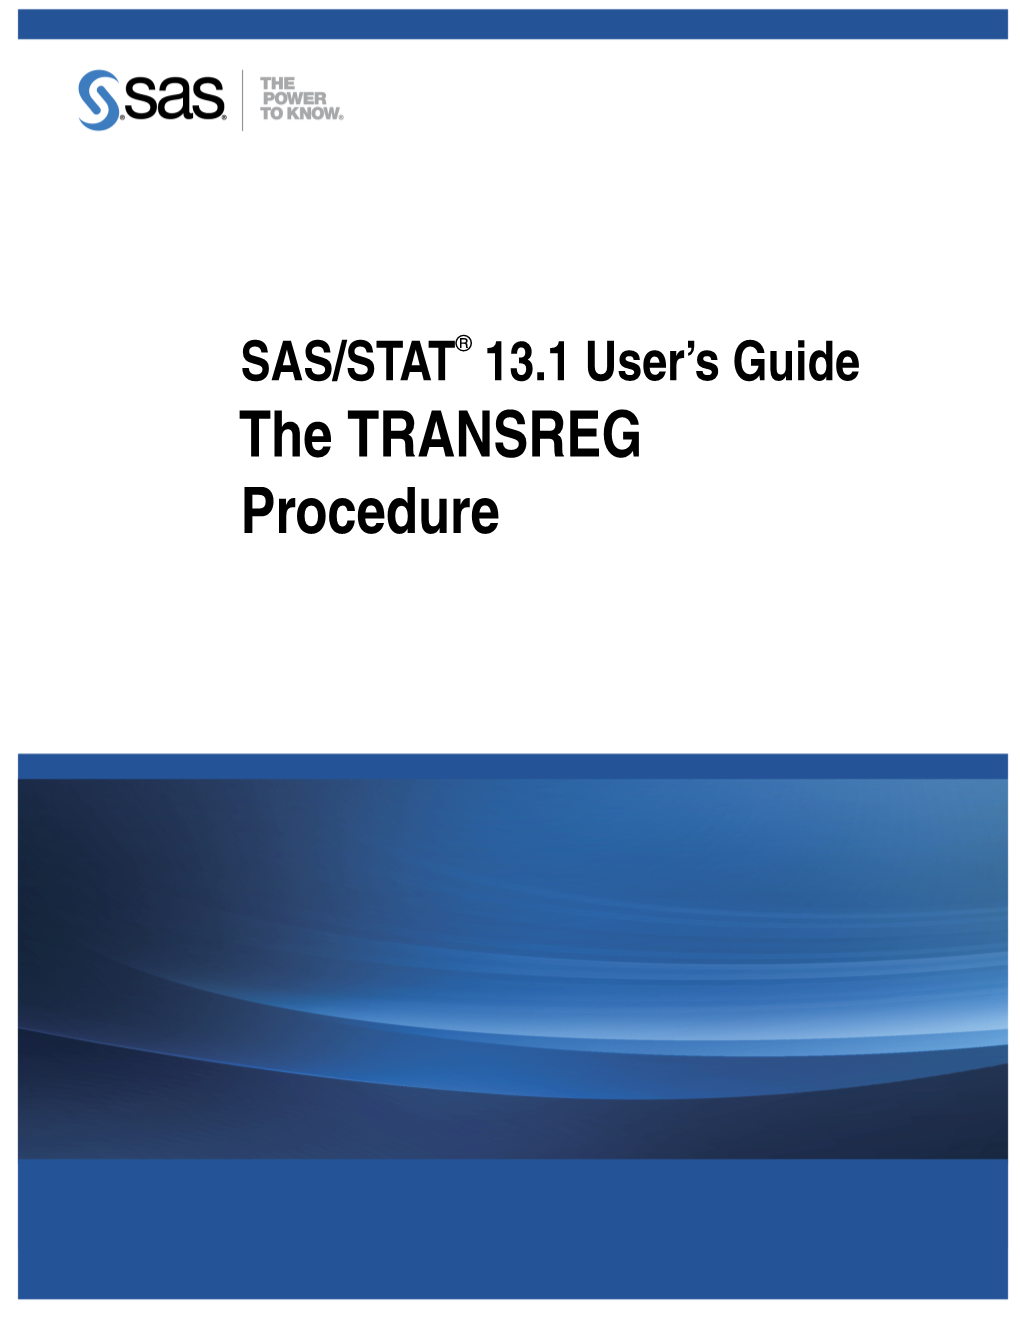 The TRANSREG Procedure This Document Is an Individual Chapter from SAS/STAT® 13.1 User’S Guide